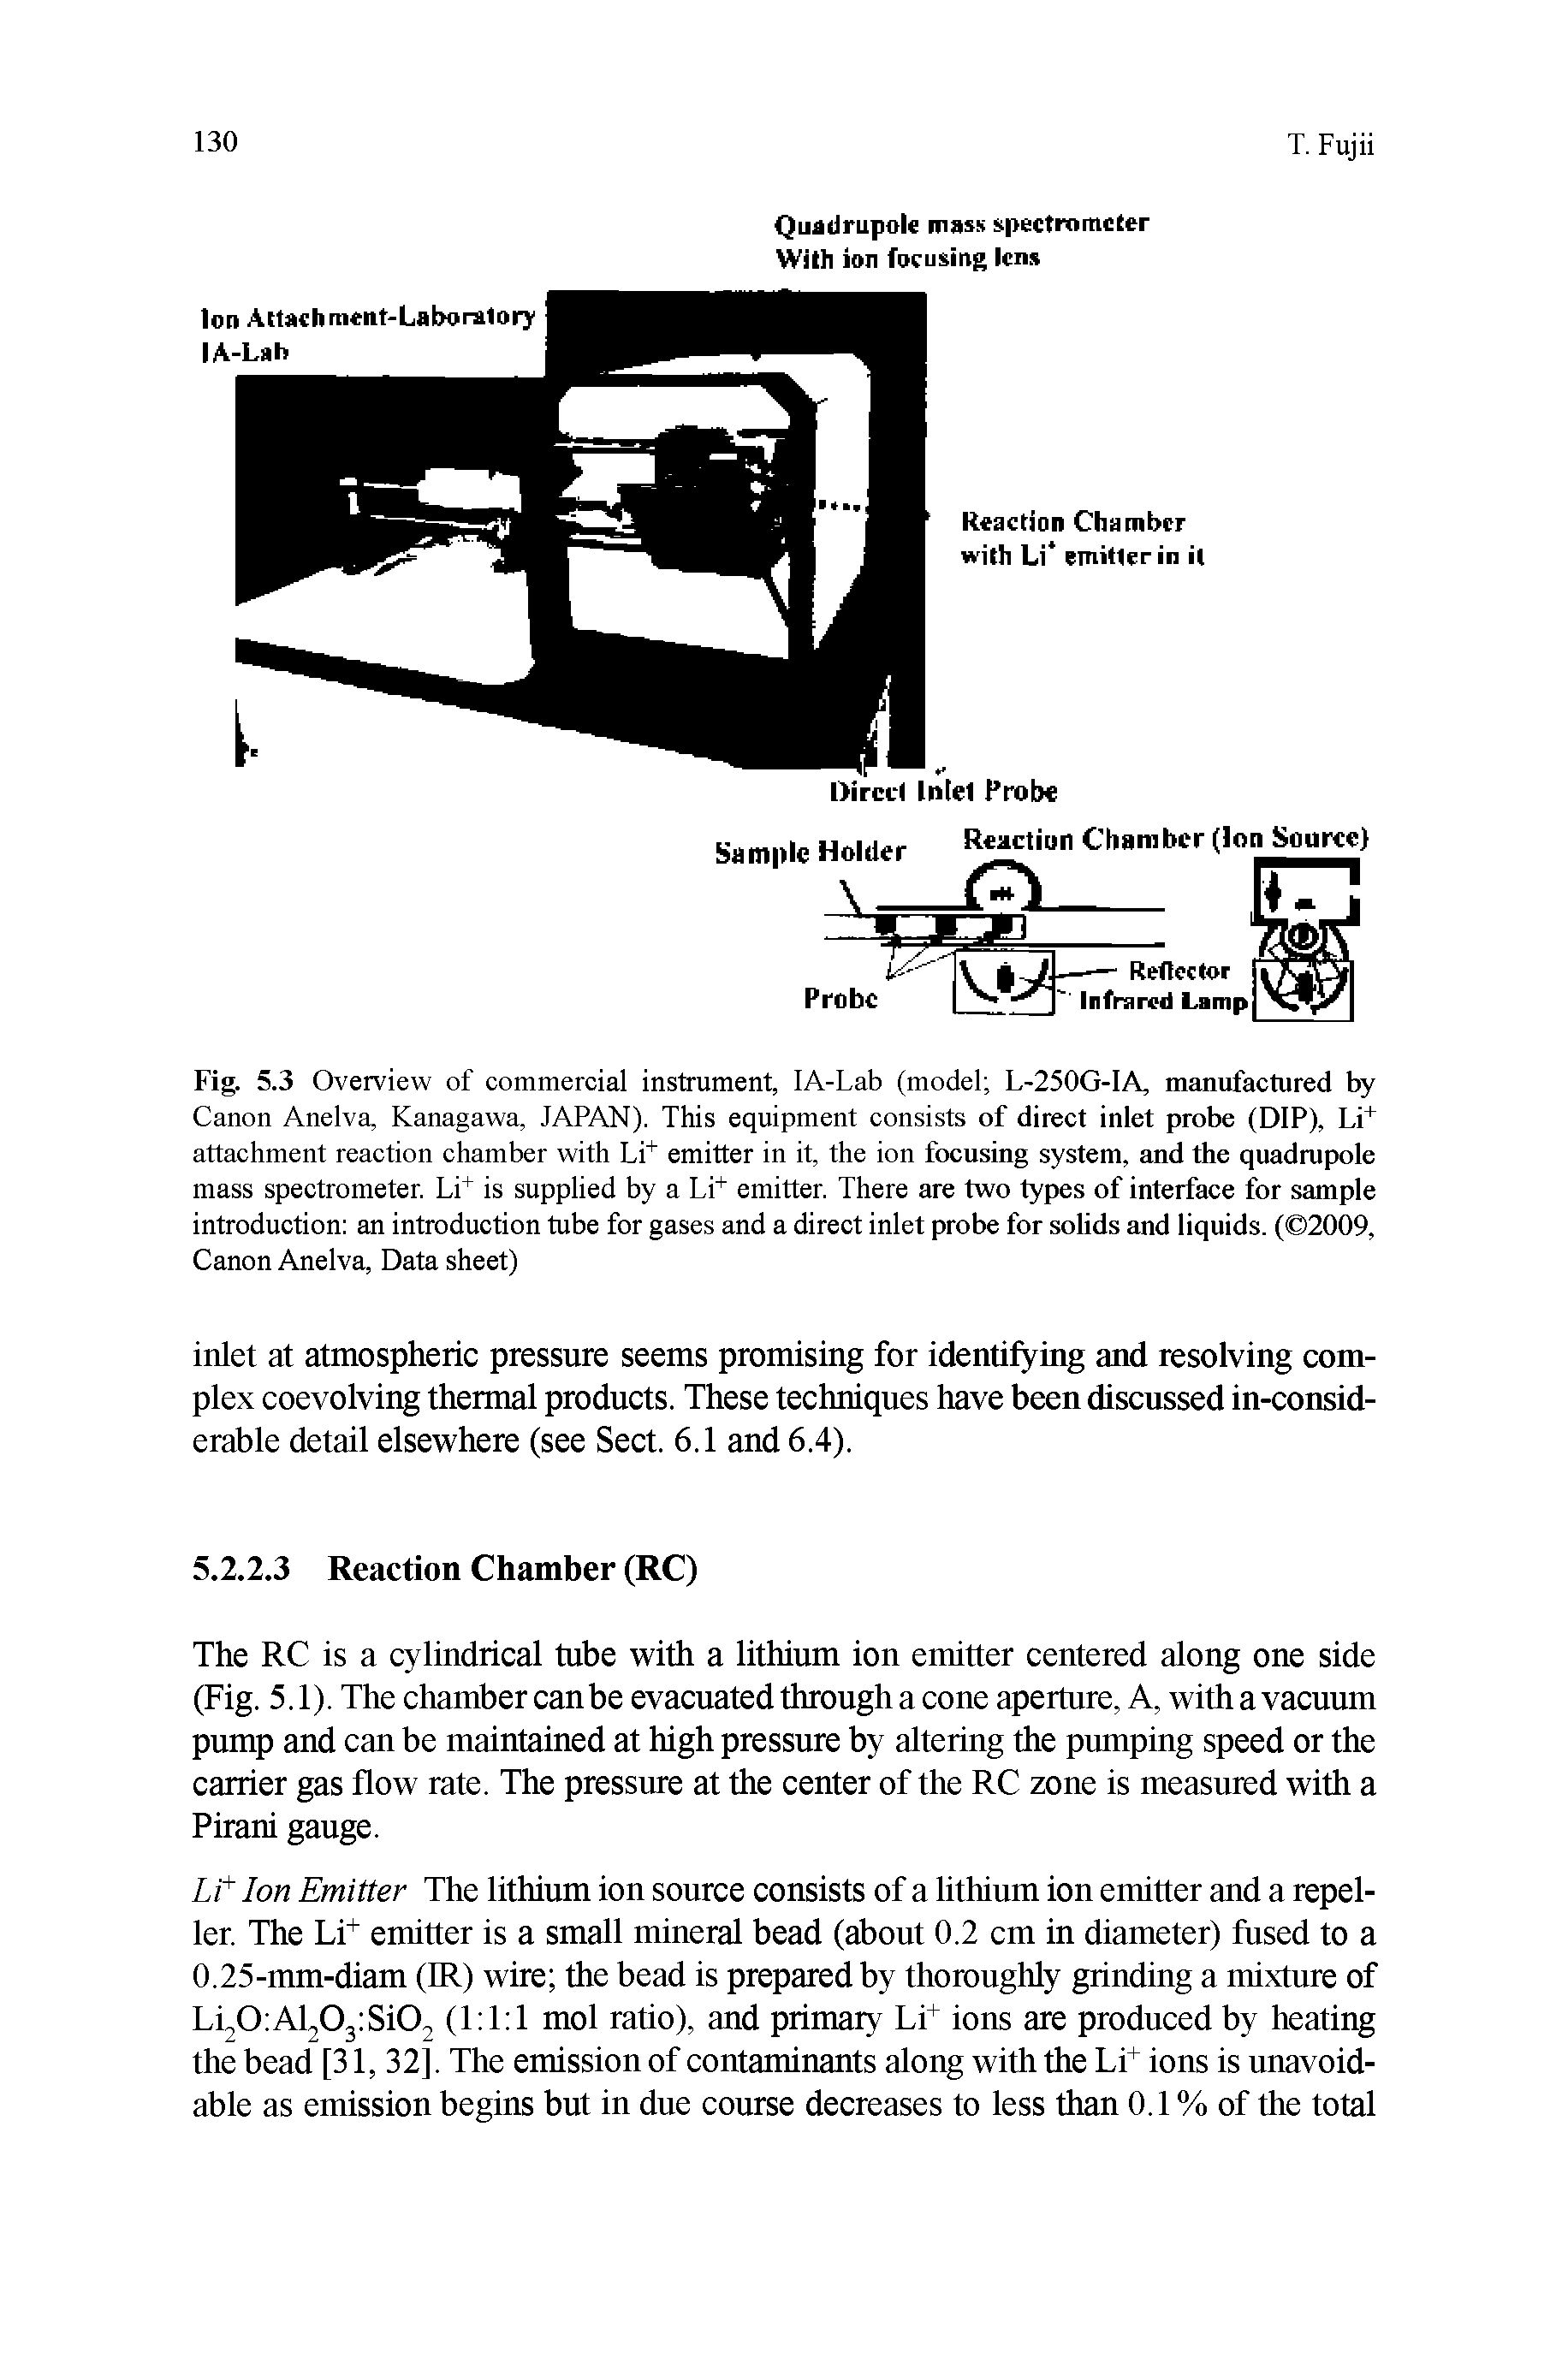 Fig. 5.3 Overview of commercial instrument, lA-Lab (model L-250G-IA, manufactured by Canon Anelva, Kanagawa, JAPAN). This equipment consists of direct inlet probe (DIP), Li+ attachment reaction chamber with LP emitter in it, the ion focusing system, and the quadrupole mass spectrometer. Li+ is supplied by a Li+ emitter. There are two types of interface for sample introduction an introduction tube for gases and a direct inlet probe for solids and liquids. ( 2009, Canon Anelva, Data sheet)...